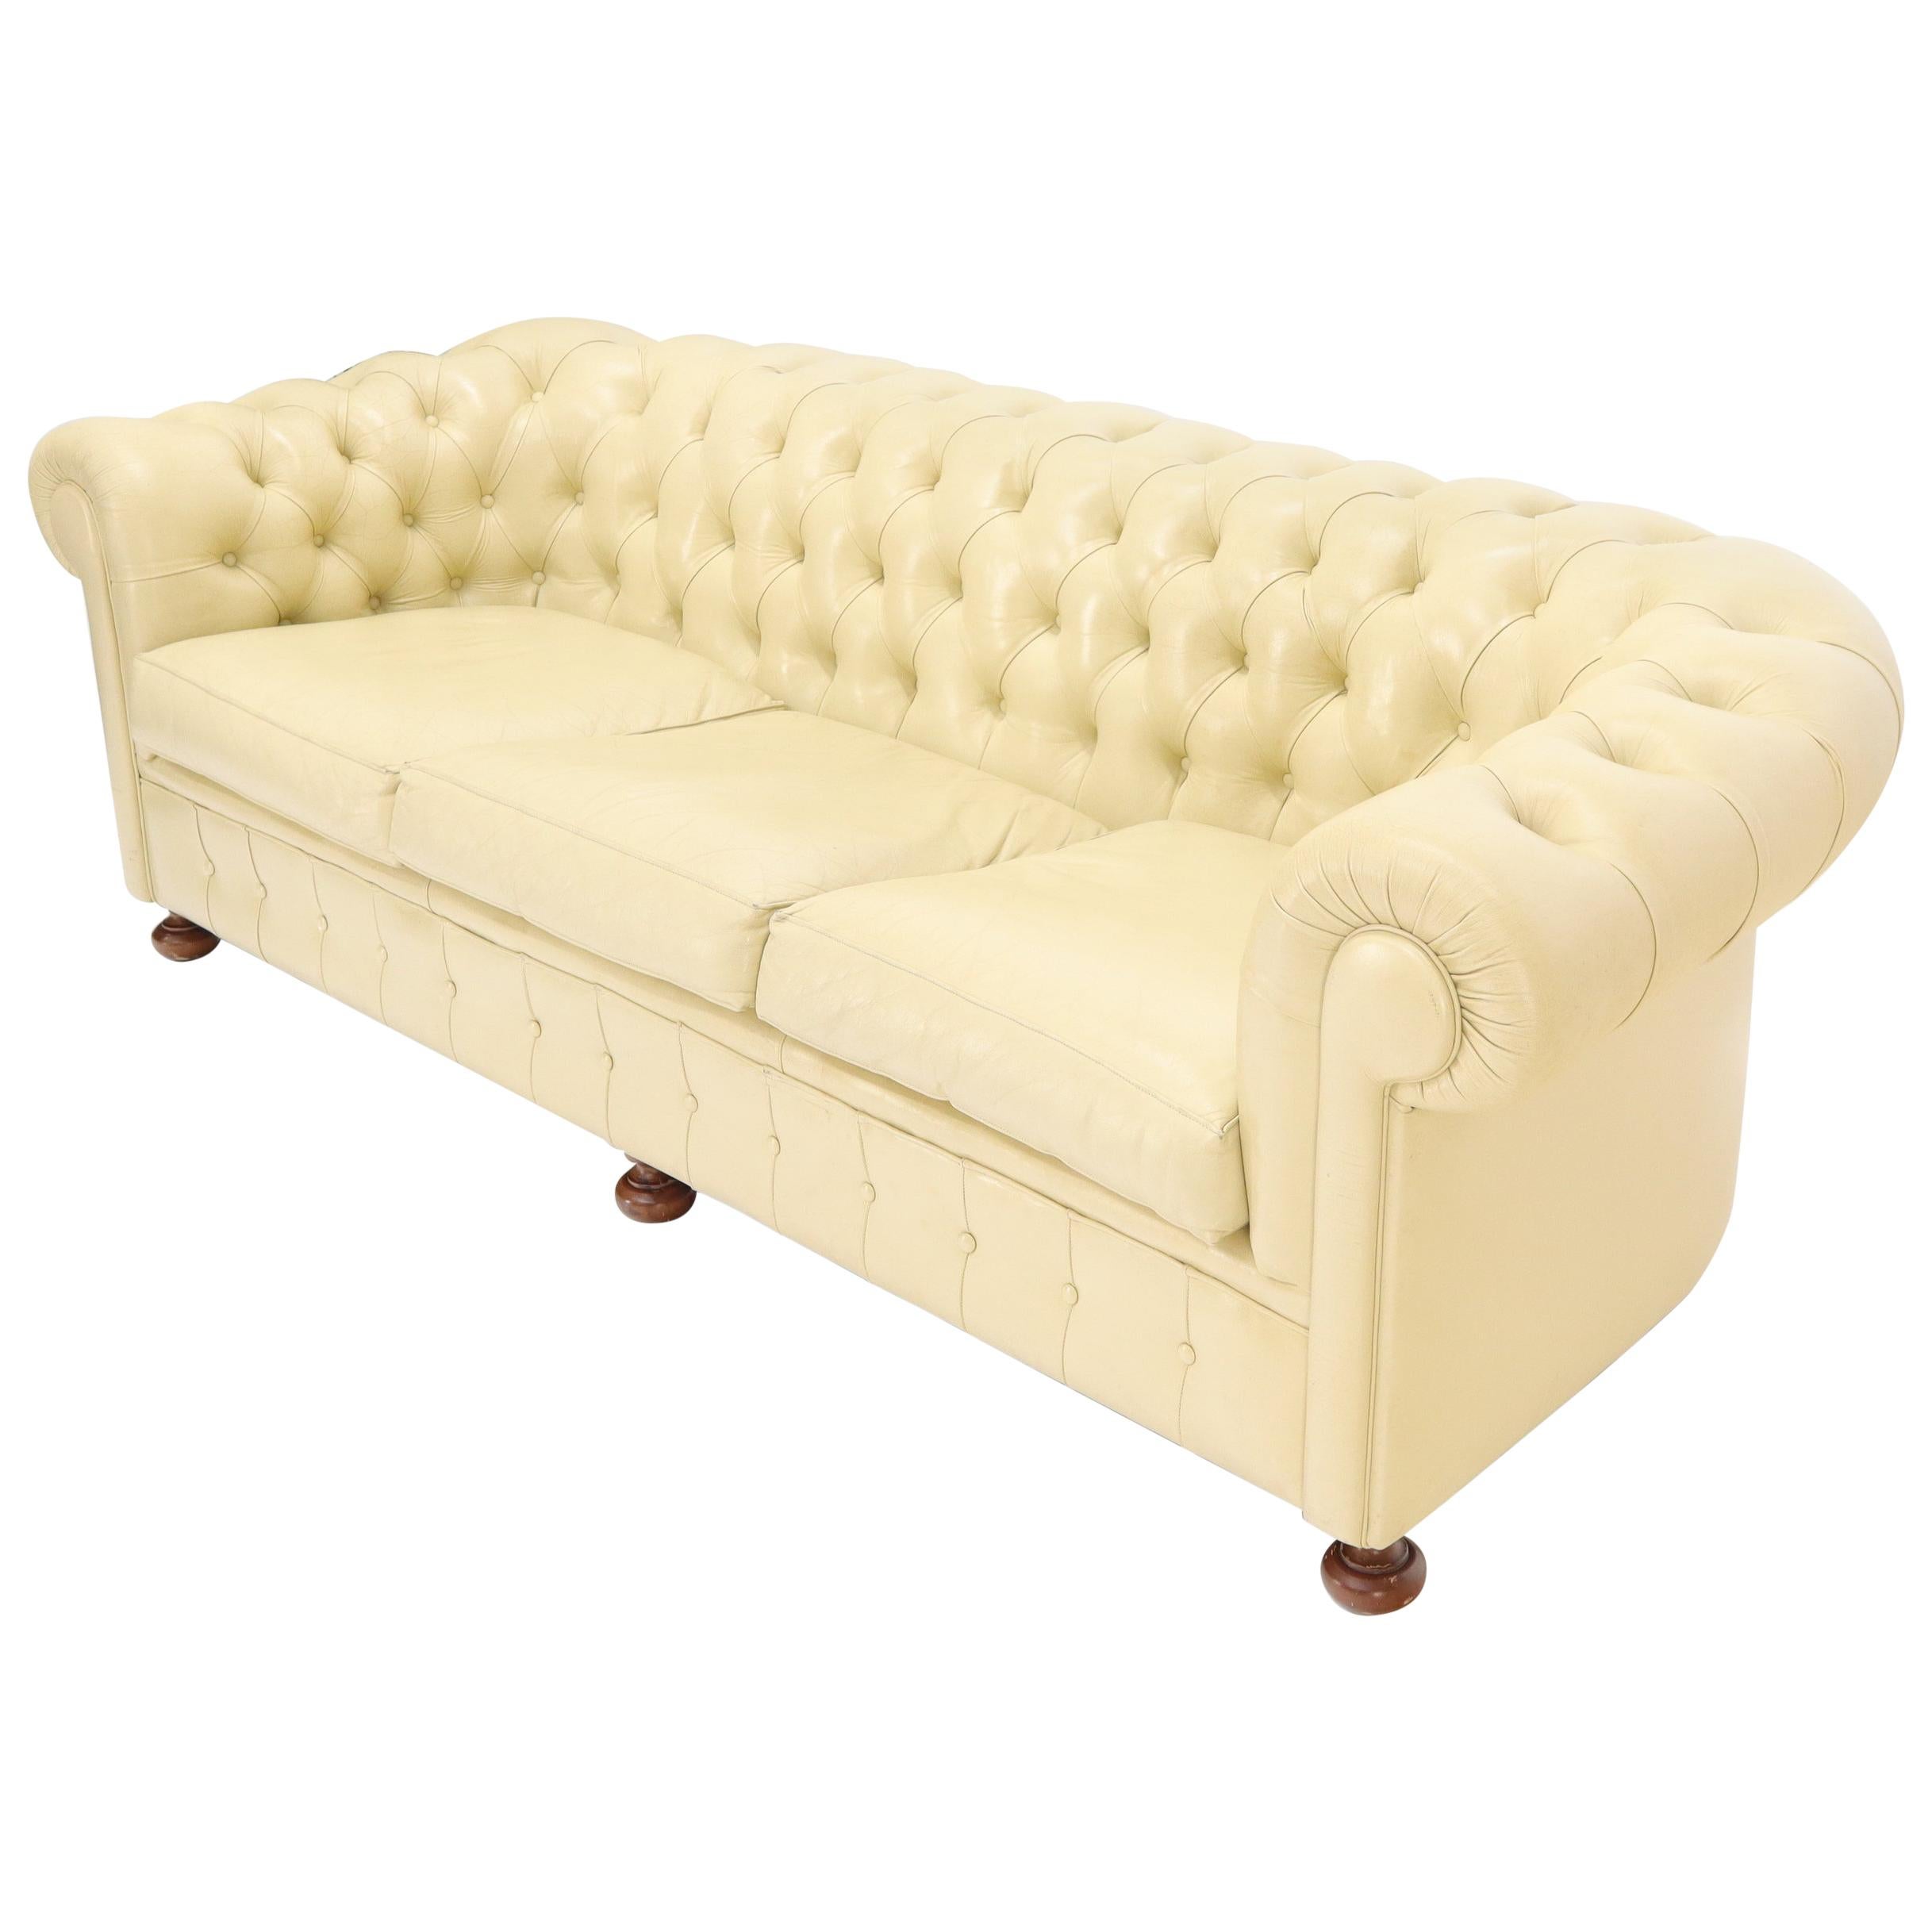 Cream Tufted Leather Chesterfield Sofa